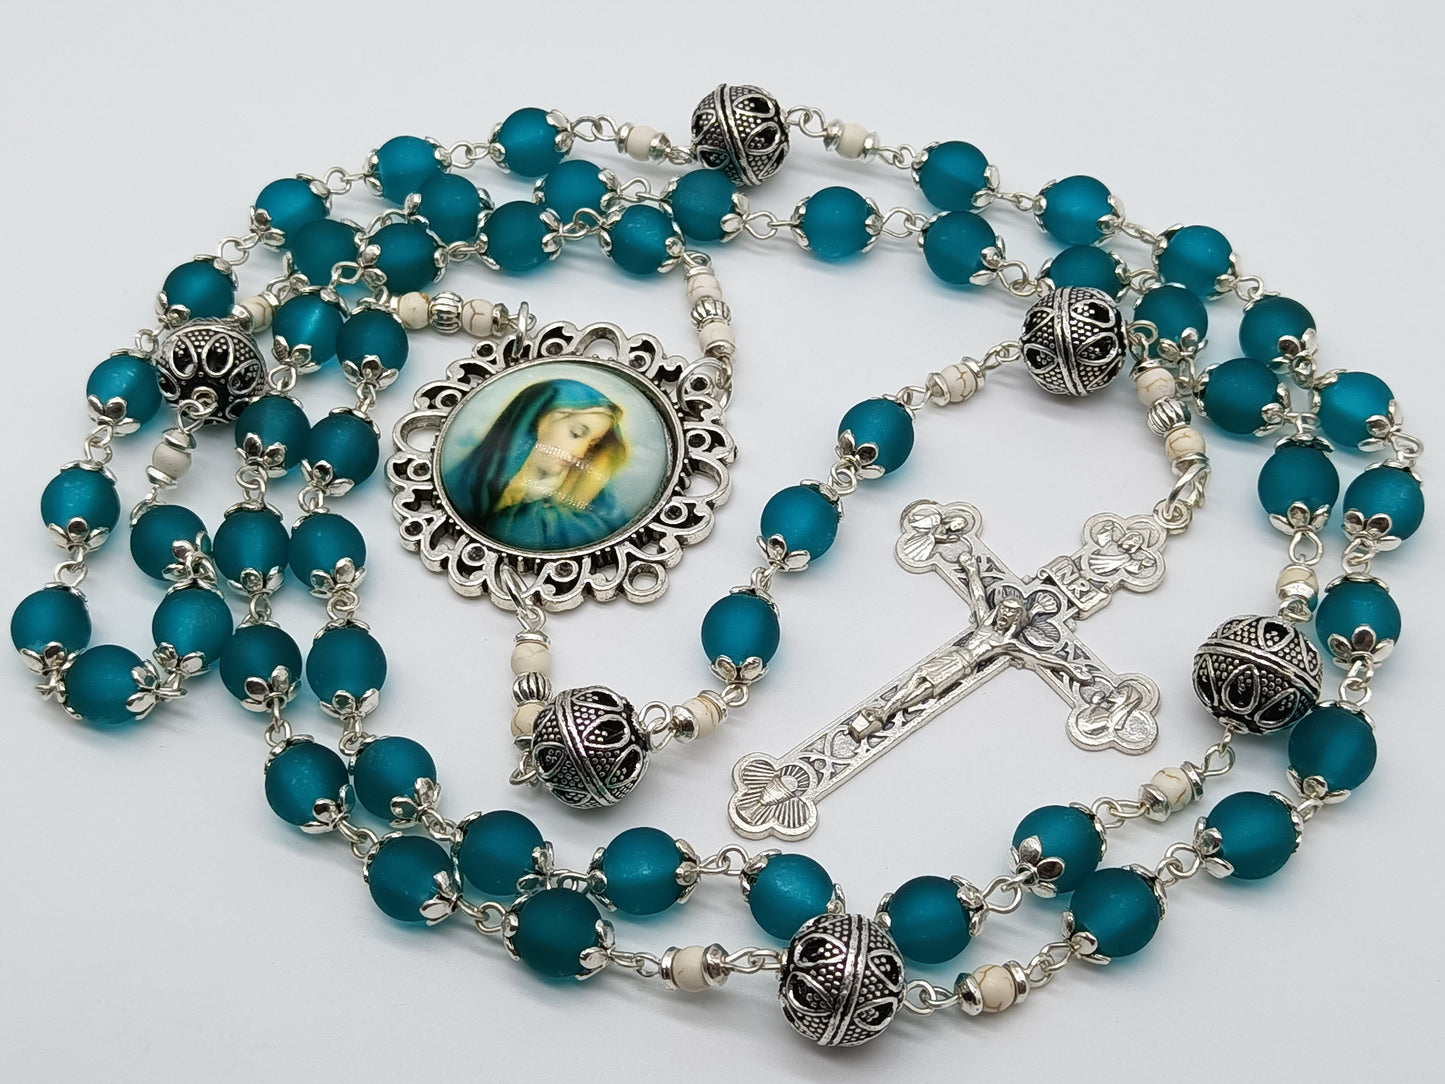 Blue glass Our Lady of Sorrows rosary beads, Glass Holy Trinity rosaries, Dolor Rosary beads, wedding Rosaries, Confirmation Rosary.